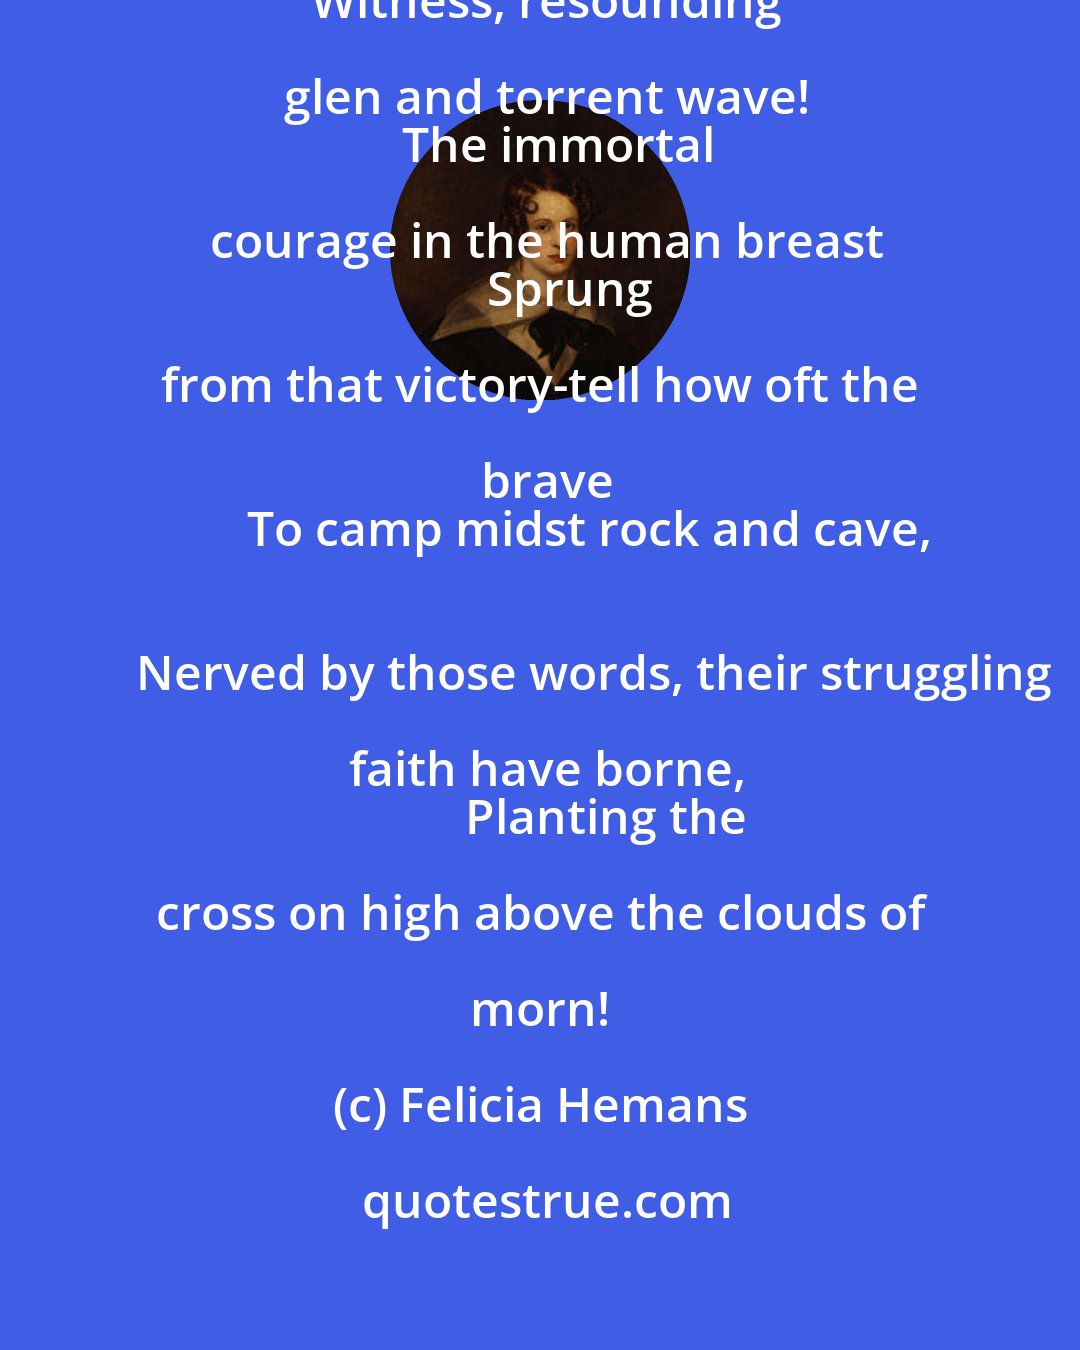 Felicia Hemans: Christ hath arisen! O mountain peaks, attest-
  Witness, resounding glen and torrent wave!
    The immortal courage in the human breast
      Sprung from that victory-tell how oft the brave
        To camp midst rock and cave,
          Nerved by those words, their struggling faith have borne,
            Planting the cross on high above the clouds of morn!